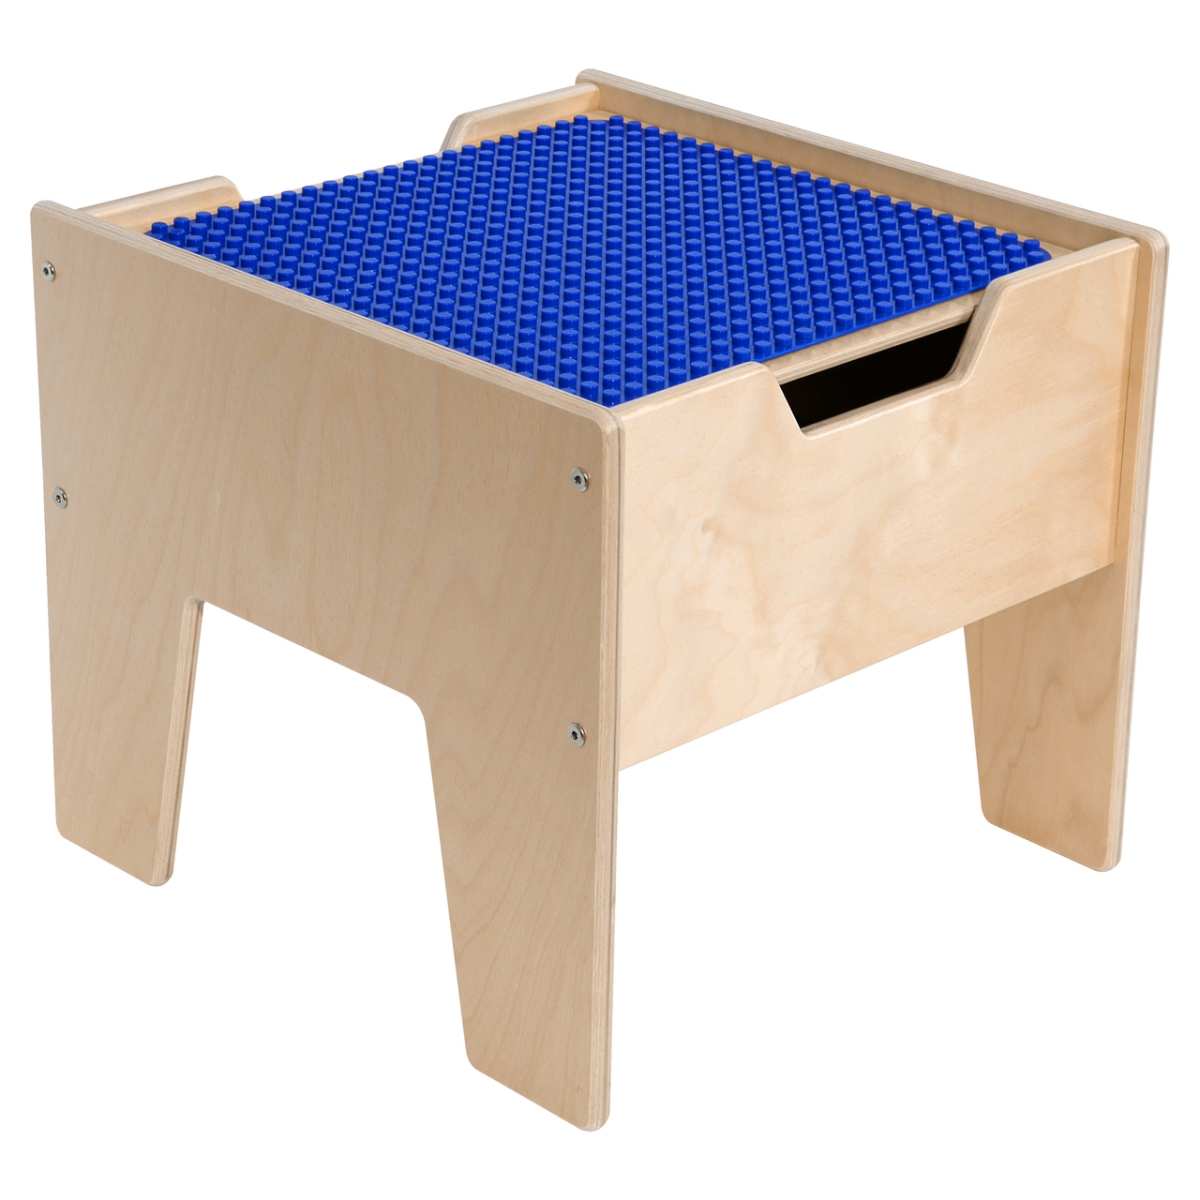 C991300-pb 2-n-1 Activity Table With Blue Duplo Compatible Top - Rta